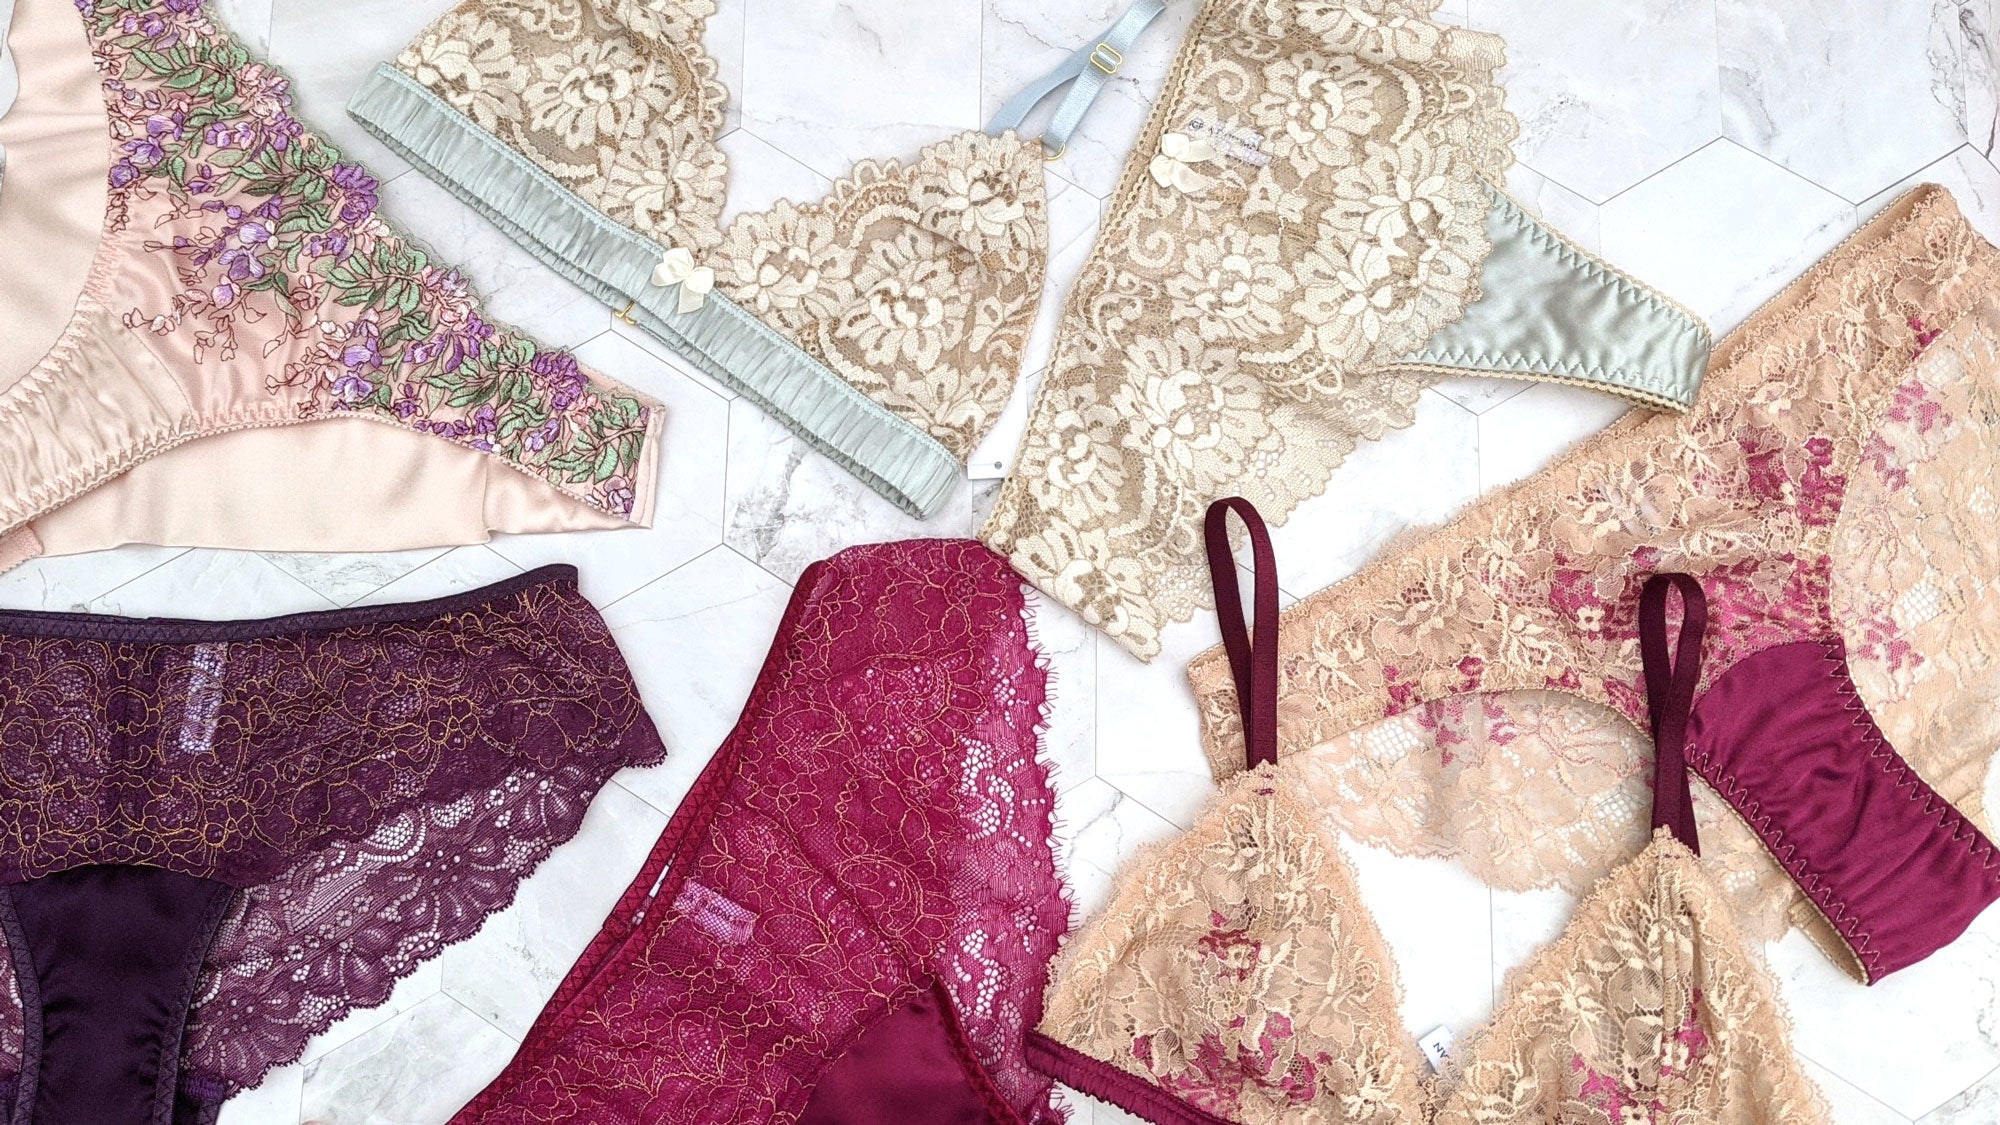 6 ways to mix and match your lingerie... On purpose!